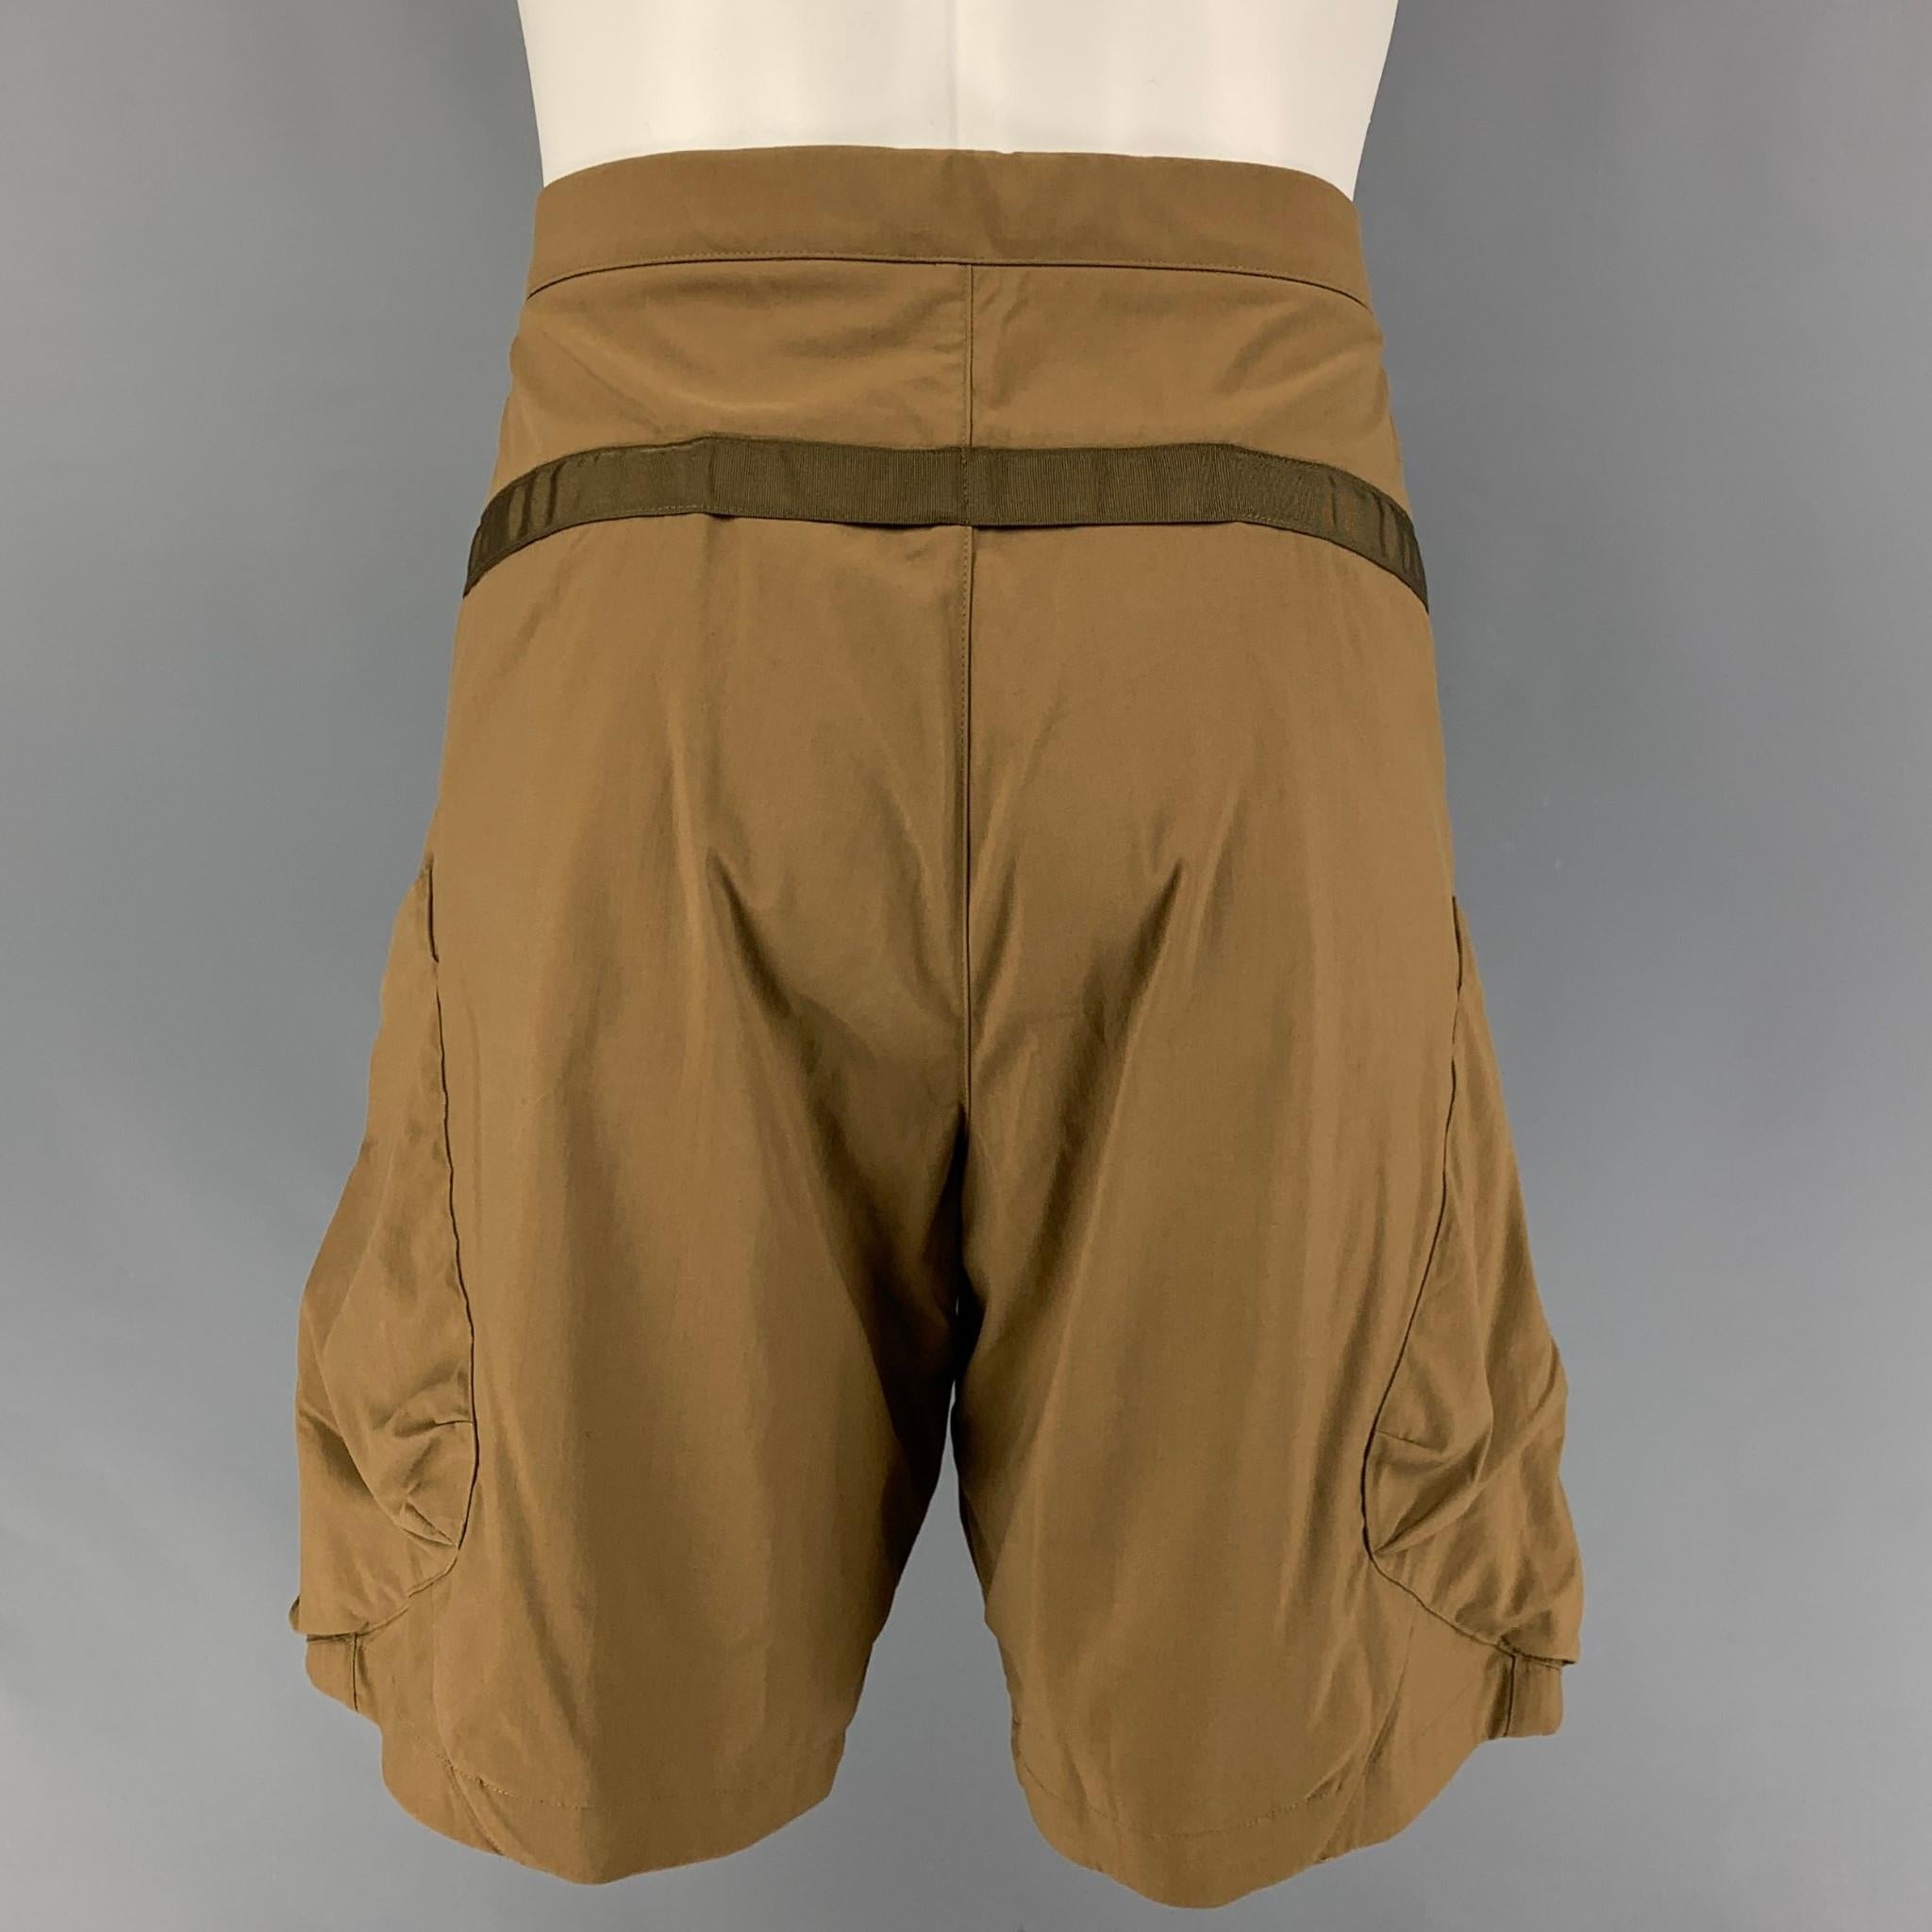 ACRONYM SS 22 'SP29-M' shorts comes in a tan polyester featuring cargo pockets, ribbon trim, and a adjustable belt closure. 

New With Tags. 
Marked: L
Original Retail Price: $730.00

Measurements:

Waist: 38 in.
Rise: 13.5 in.
Inseam: 9 in. 